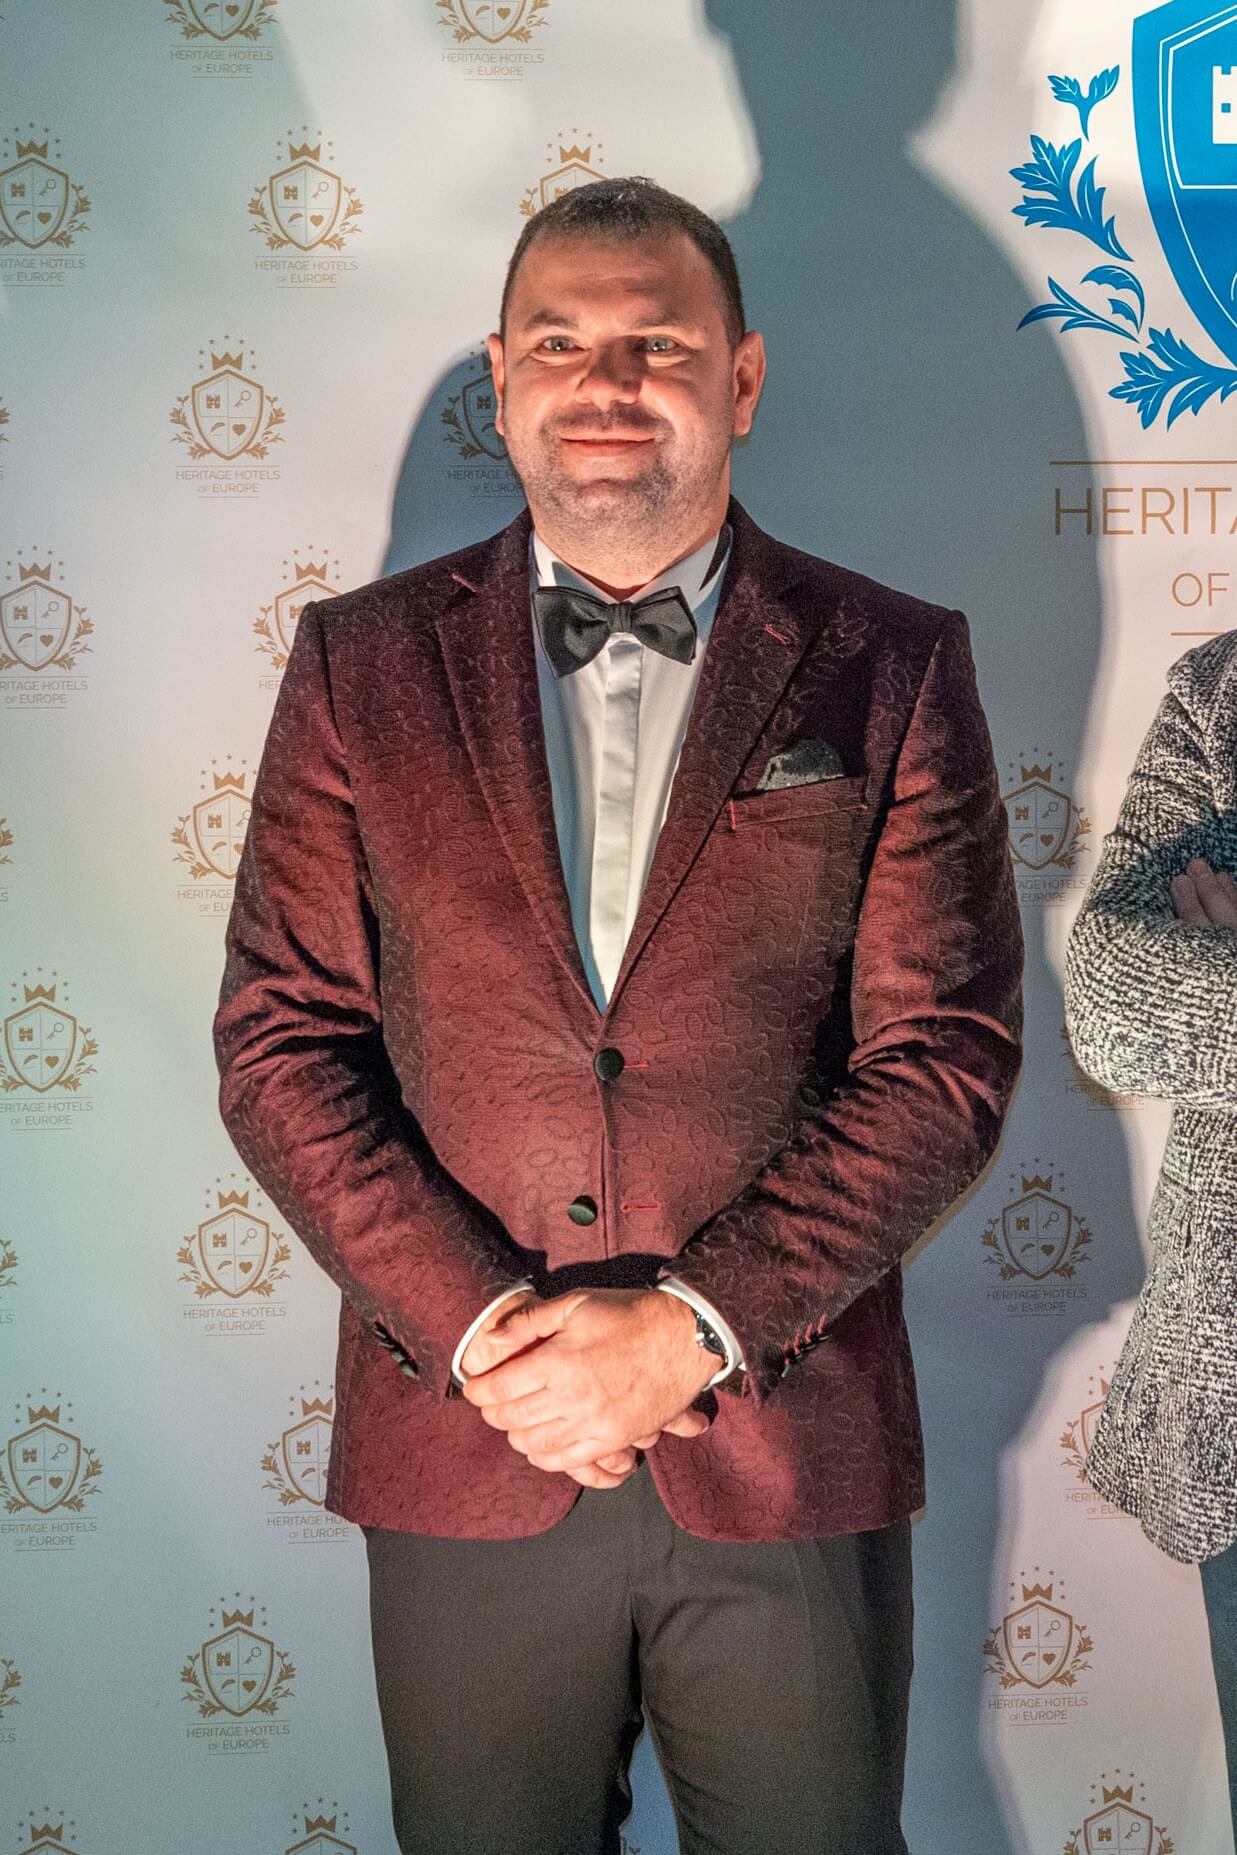 Chairman of Heritage Hotels of Europe and master of the ceremony, Jan Svoboda